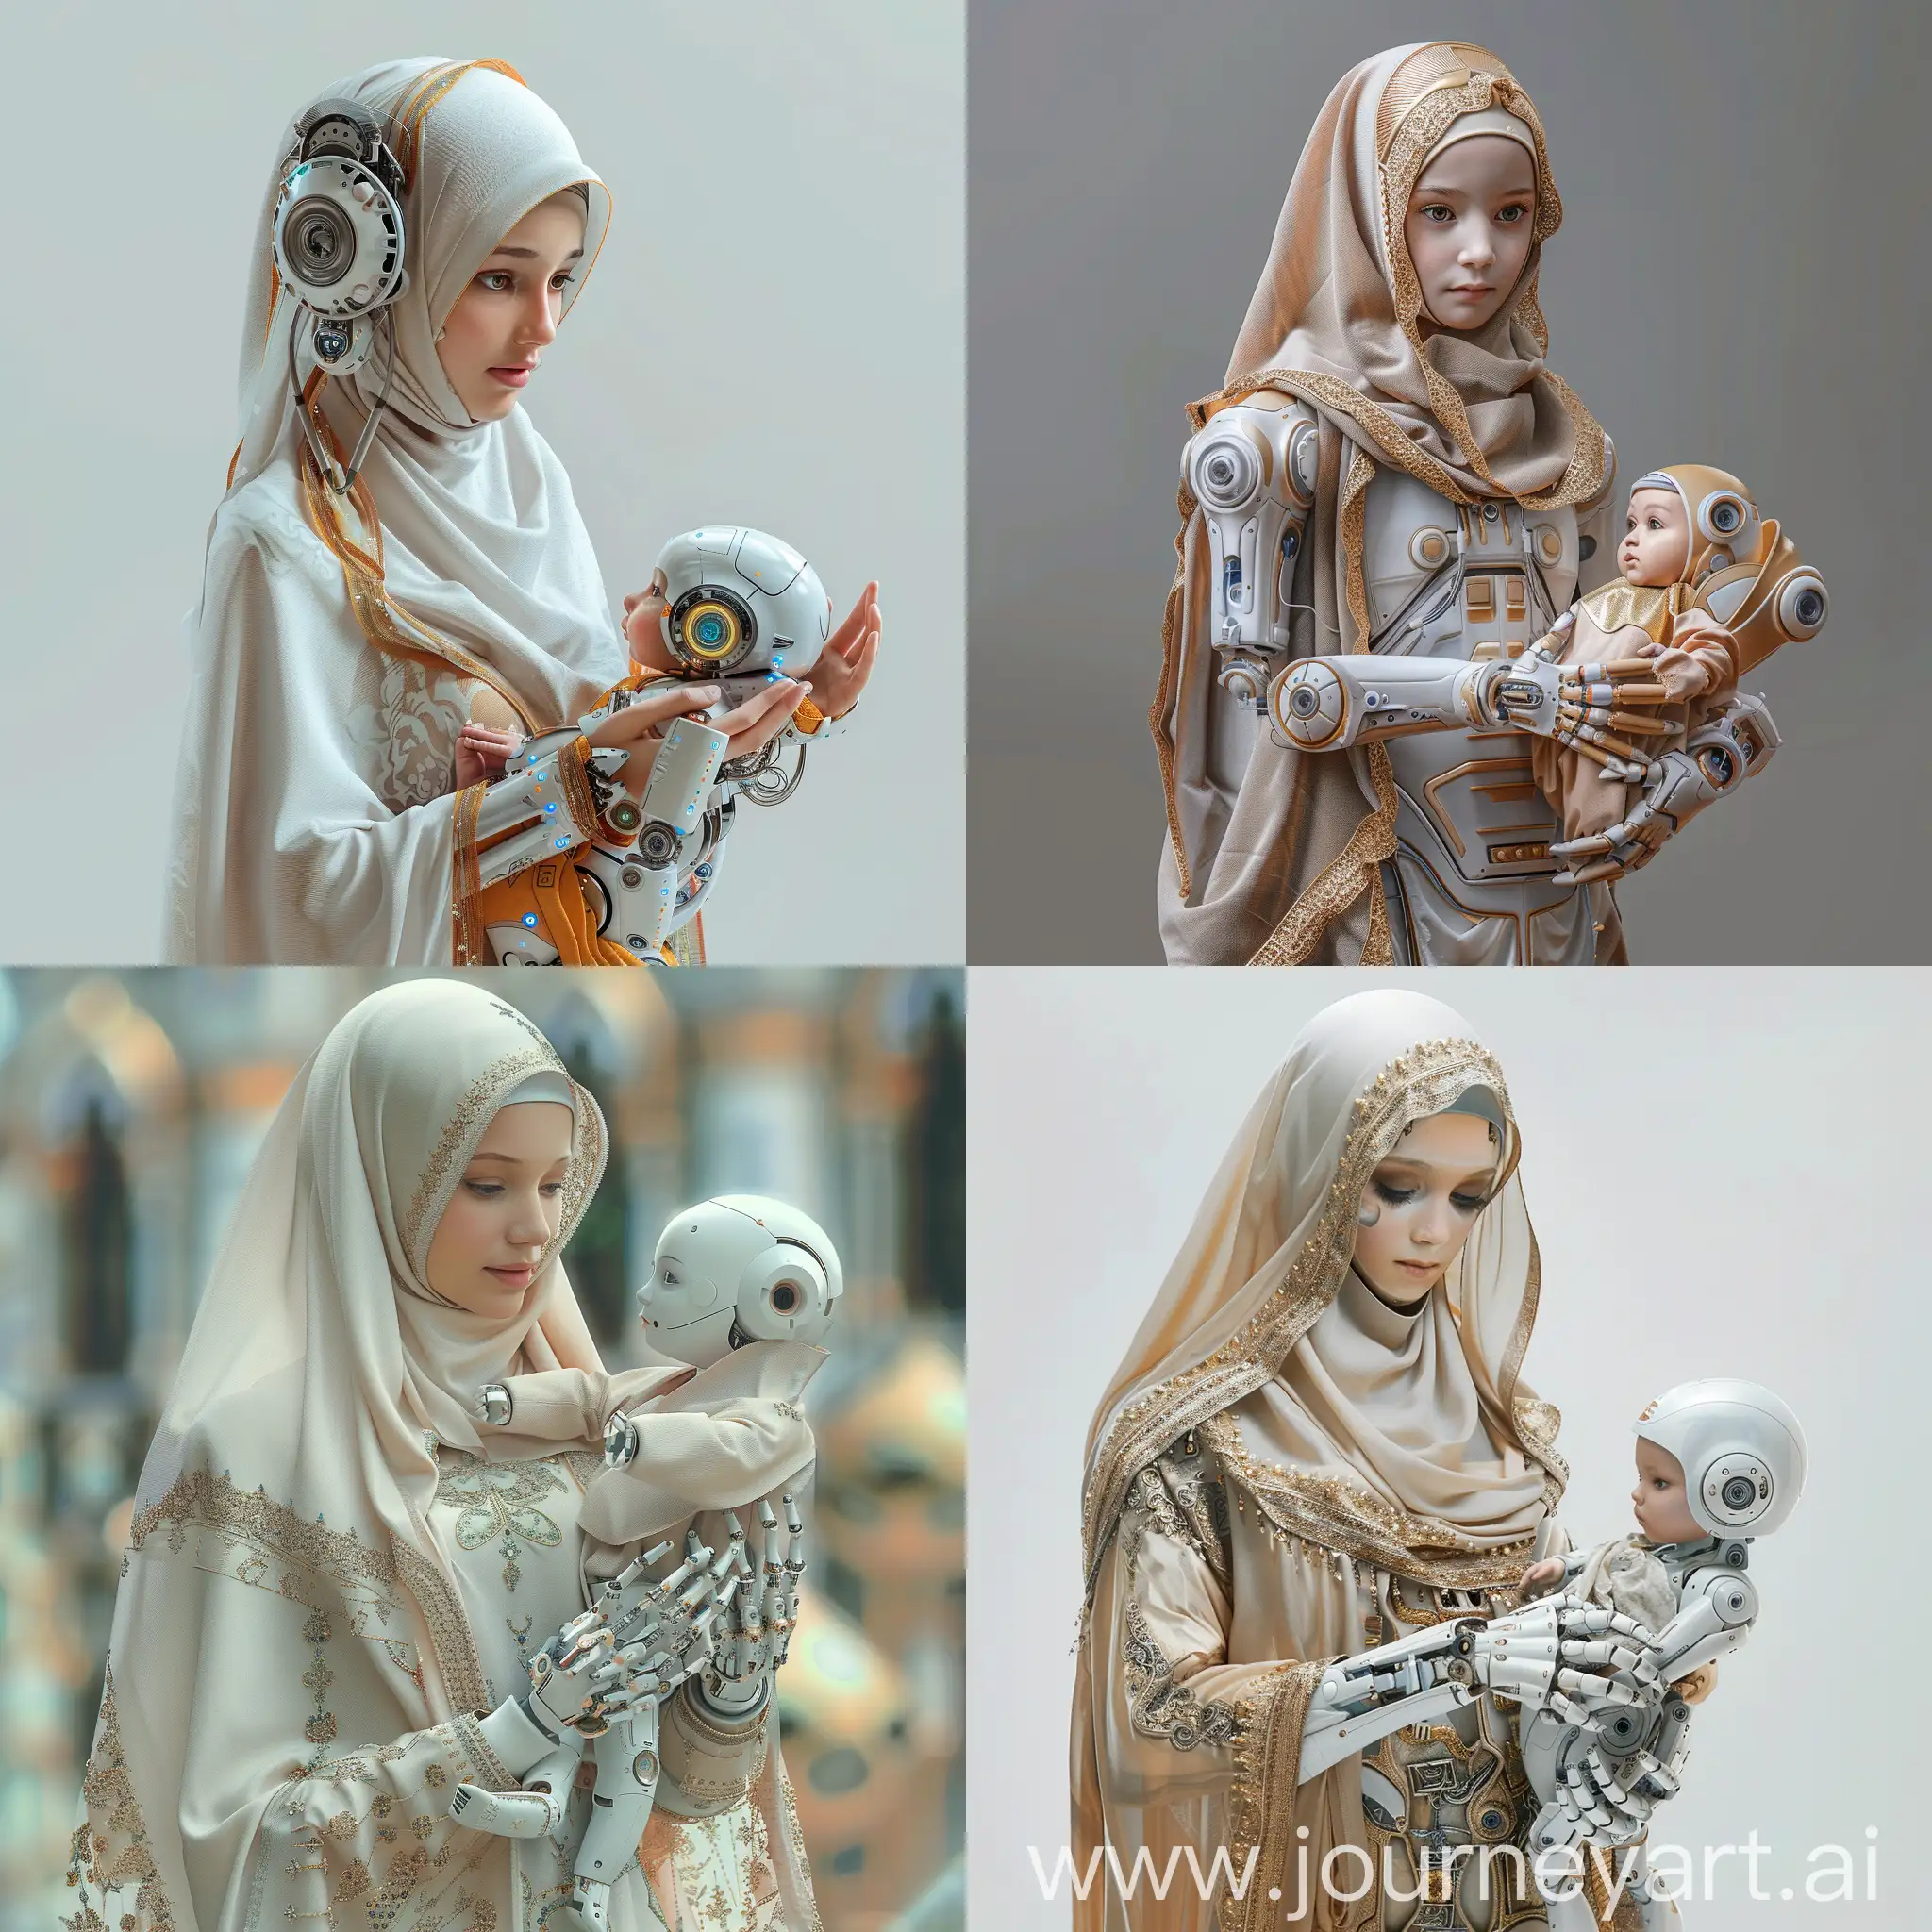 Young Muslim girl, dressed in beautiful Muslim clothes, she is fully robotic, holding a robot baby in her hands, high detail, hyperrealism